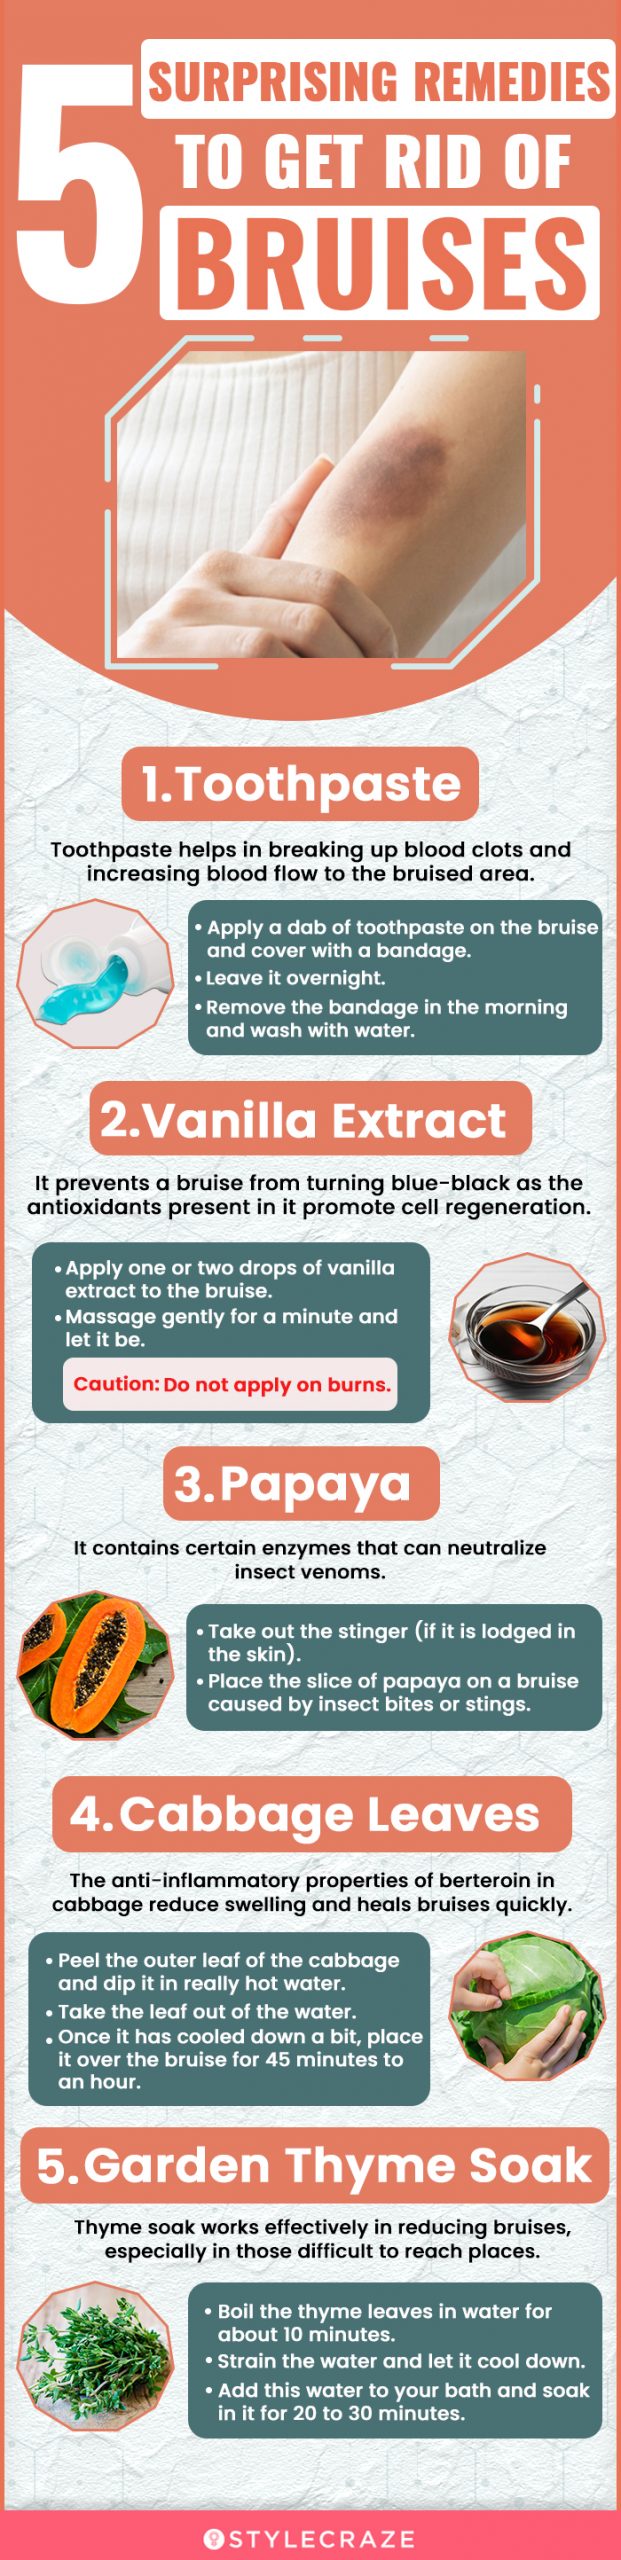 21 Effective Home Remedies For Bruises